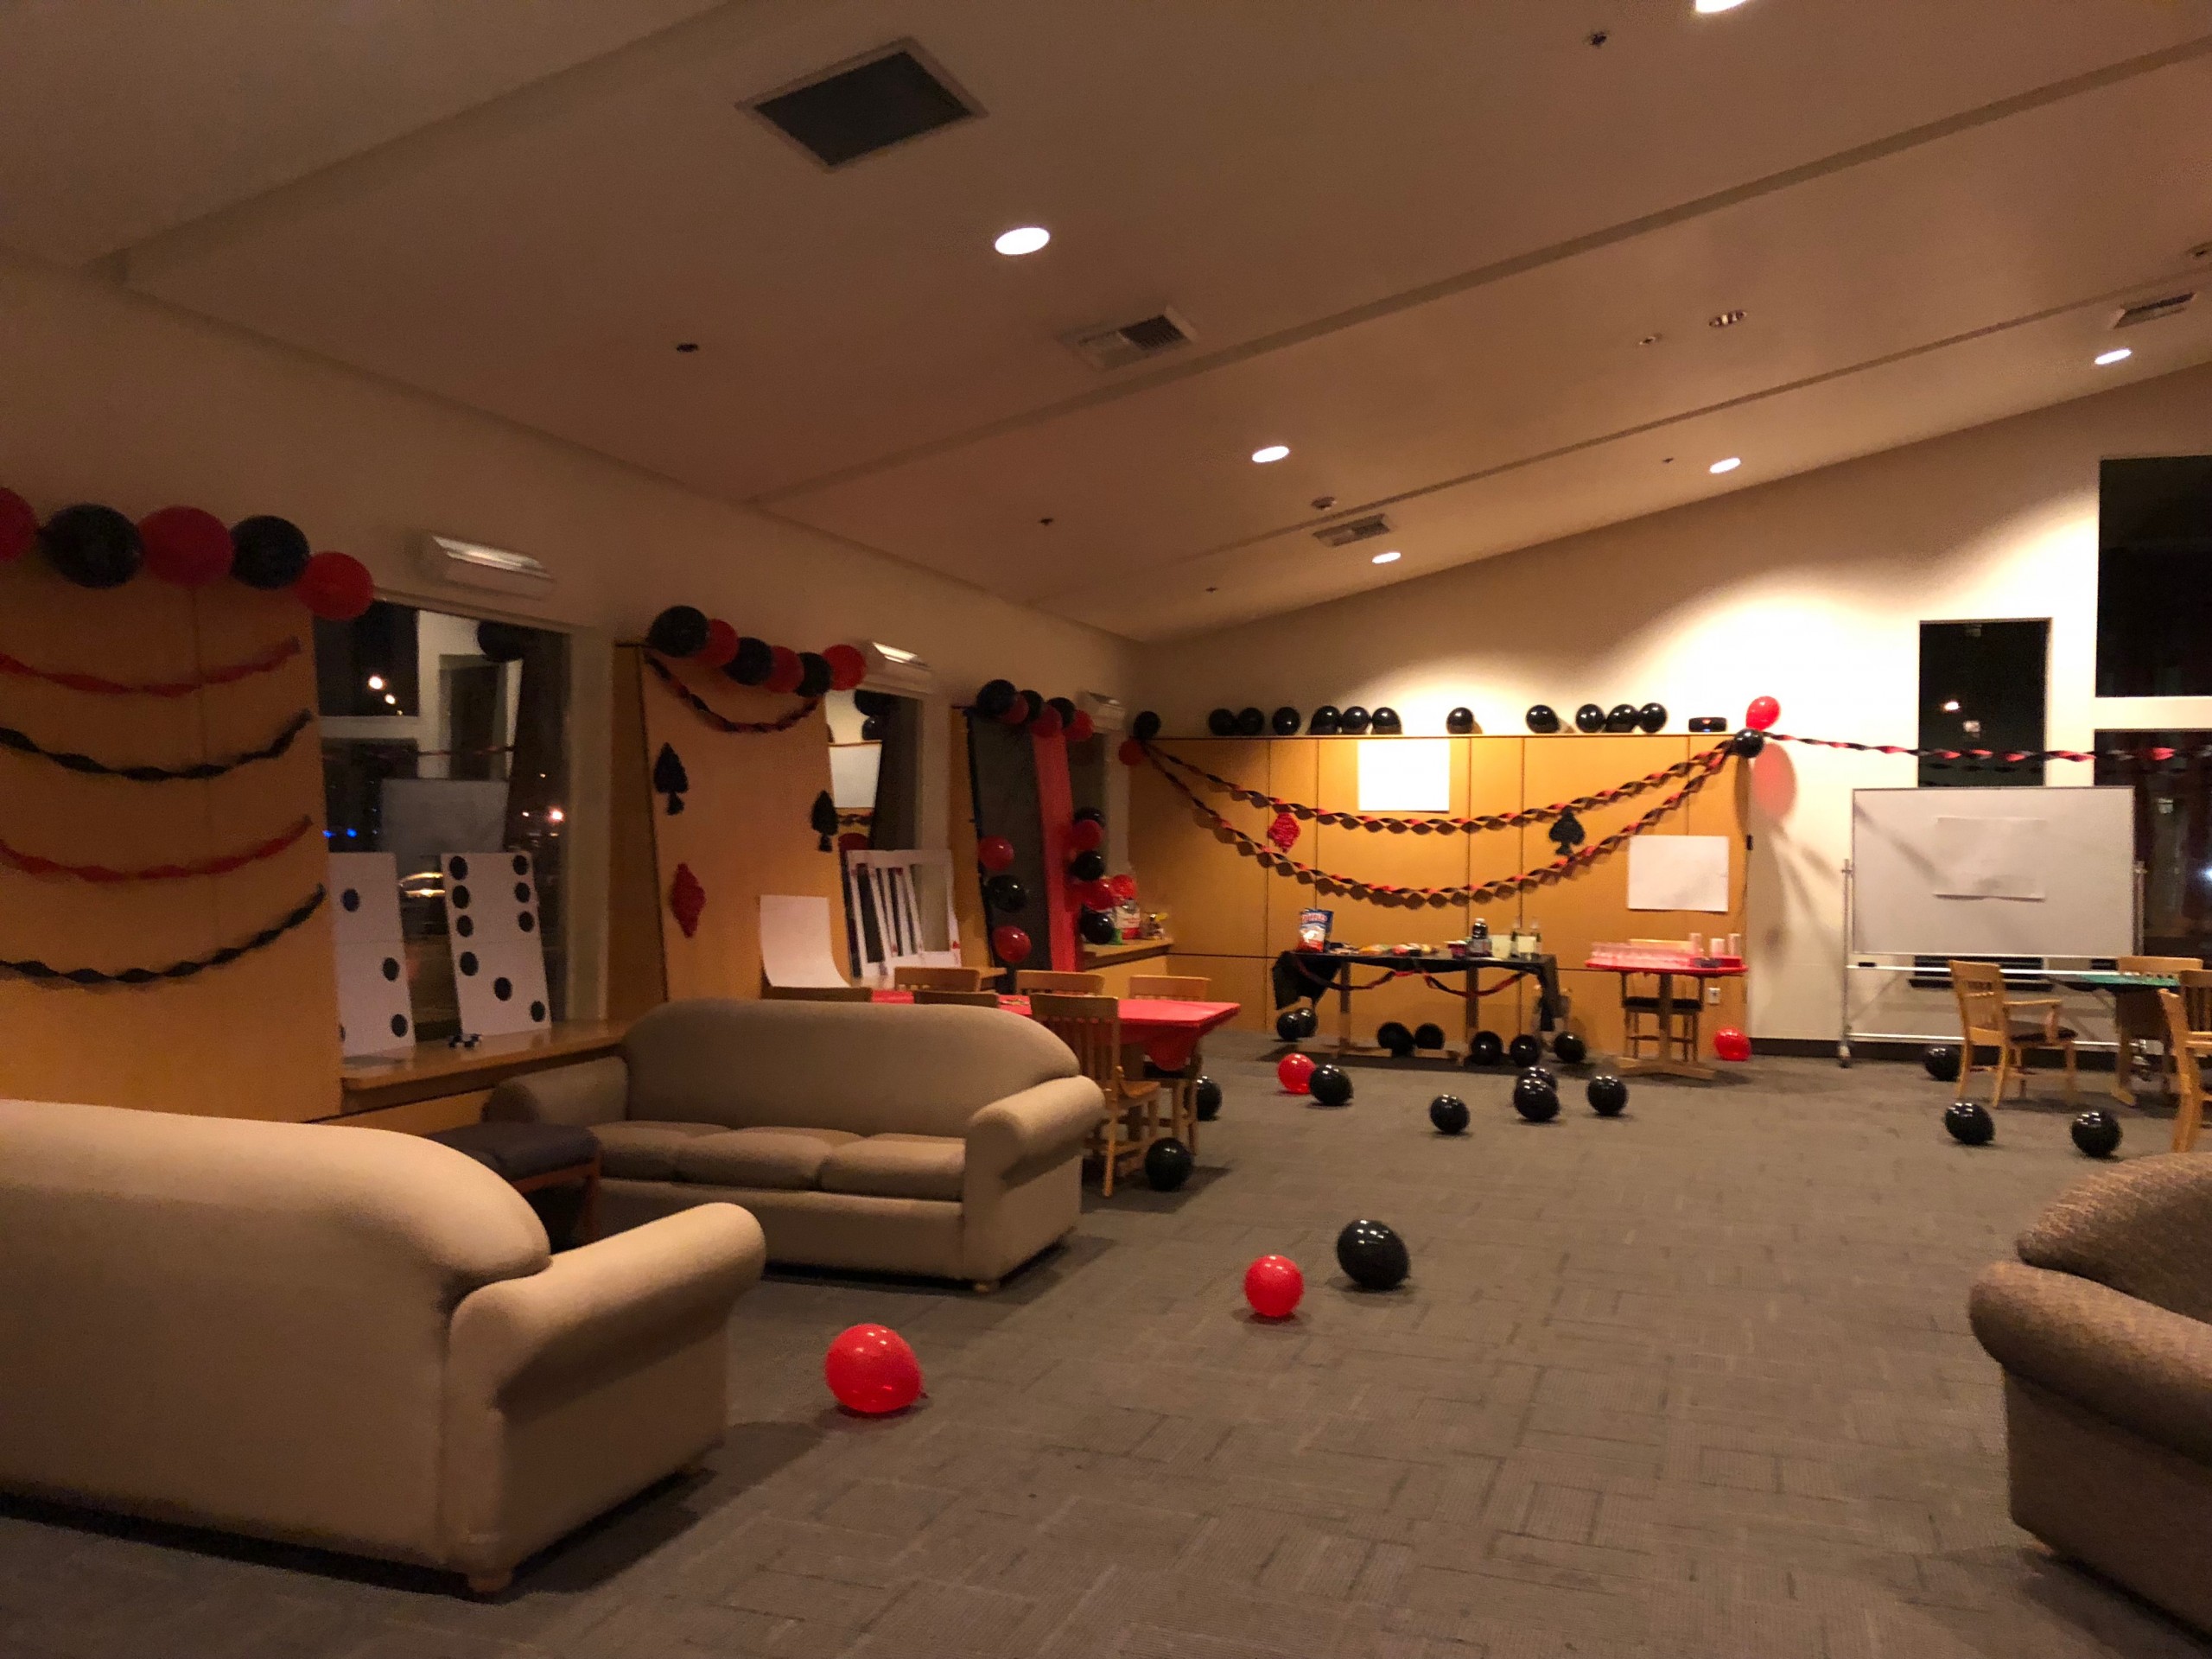 South Hall lobby decorated for Casino Night